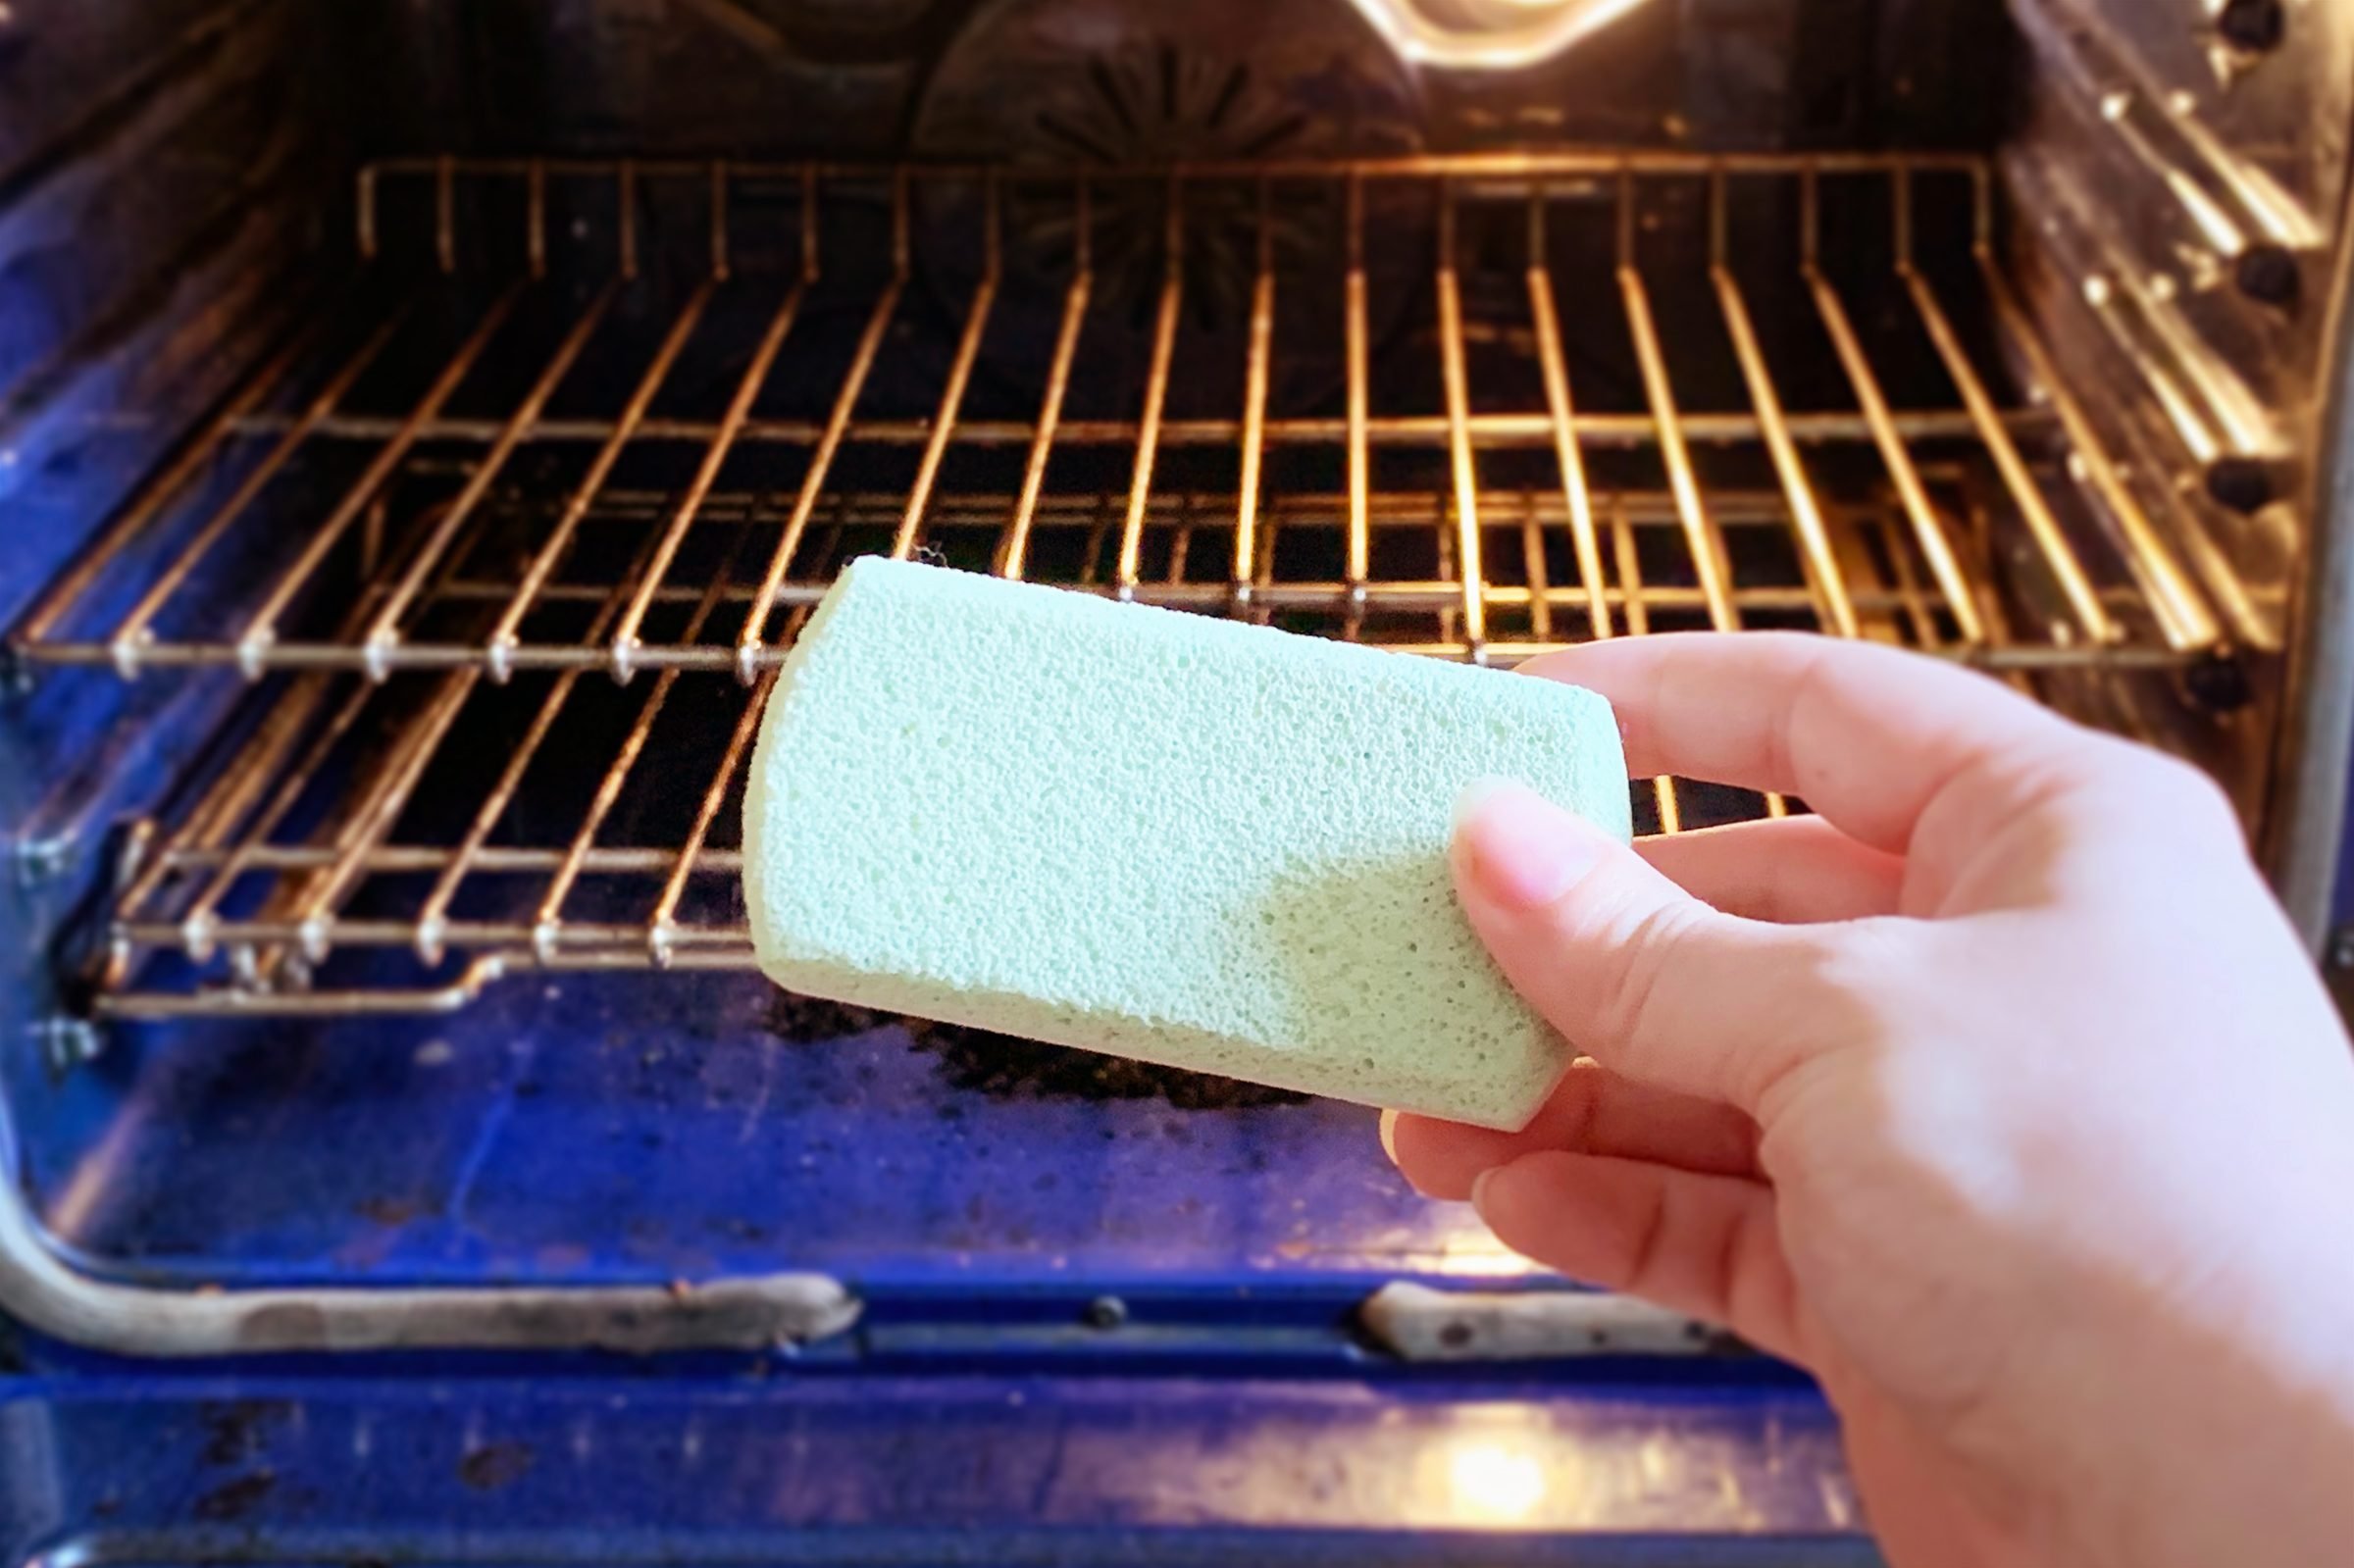 HOW TO CLEAN AN OVEN USING A SCOURING STICK/PUMICE STONE Tough